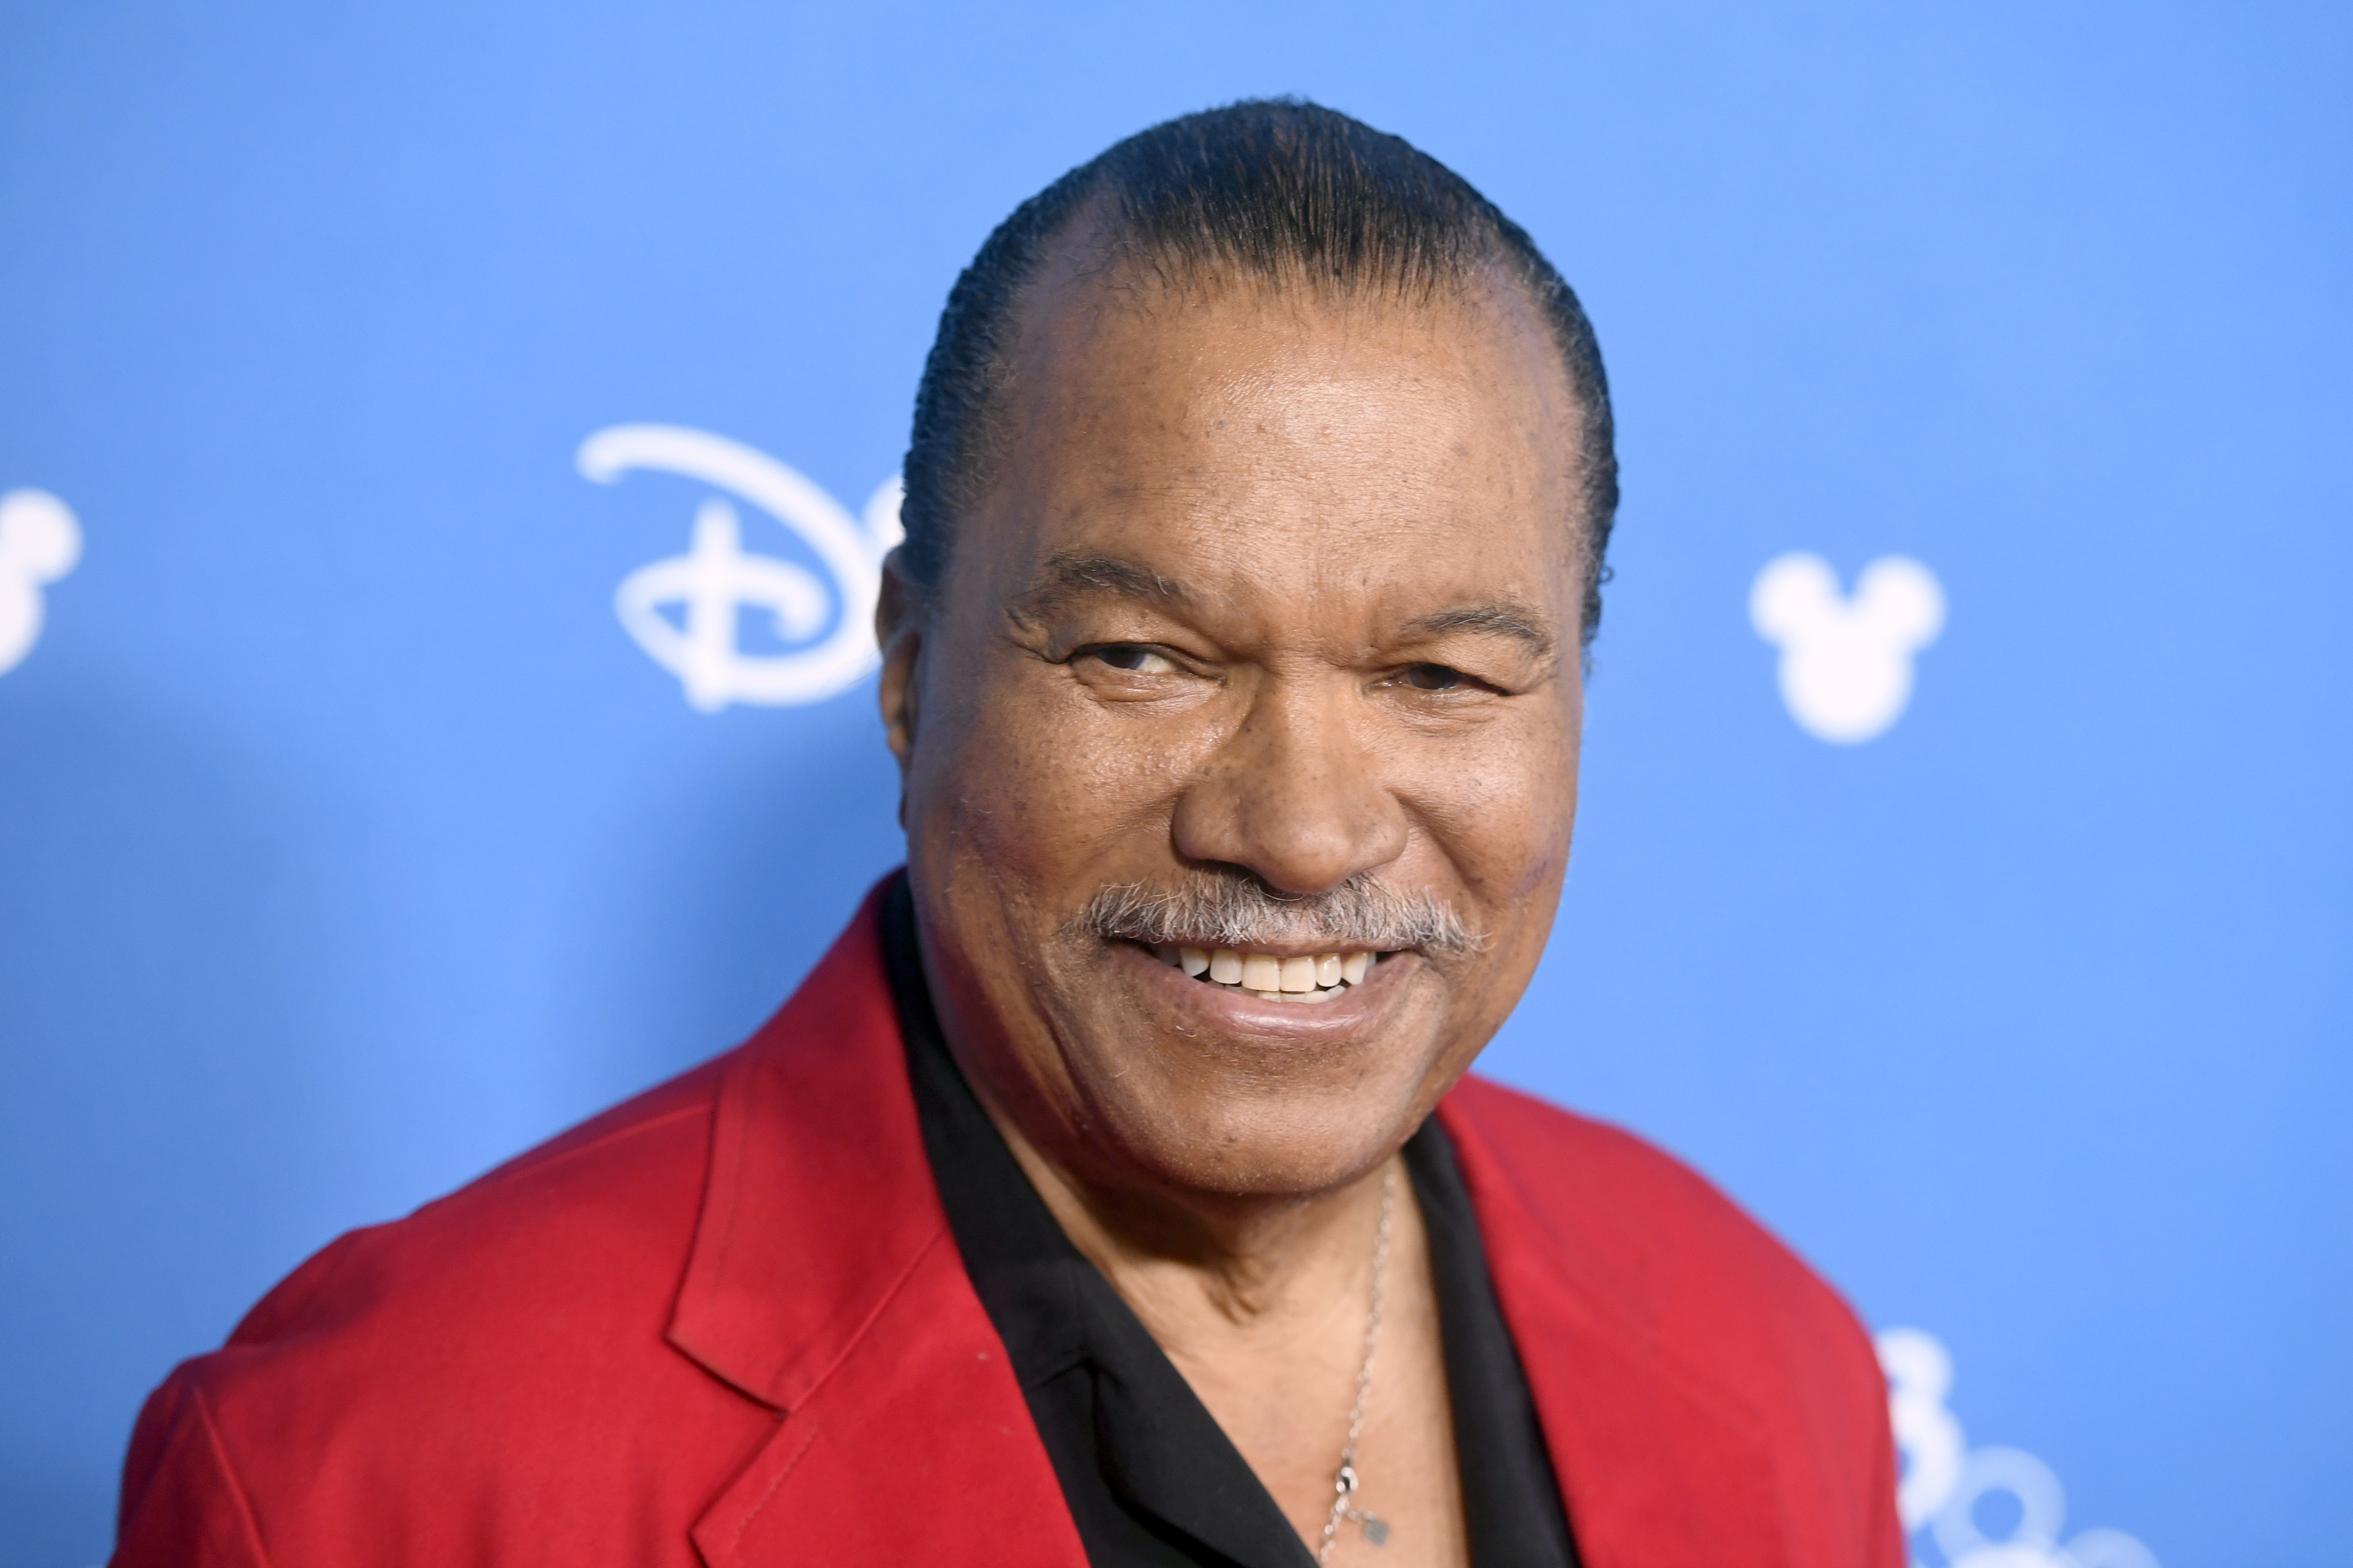 Billy Dee Williams wearing a red suit